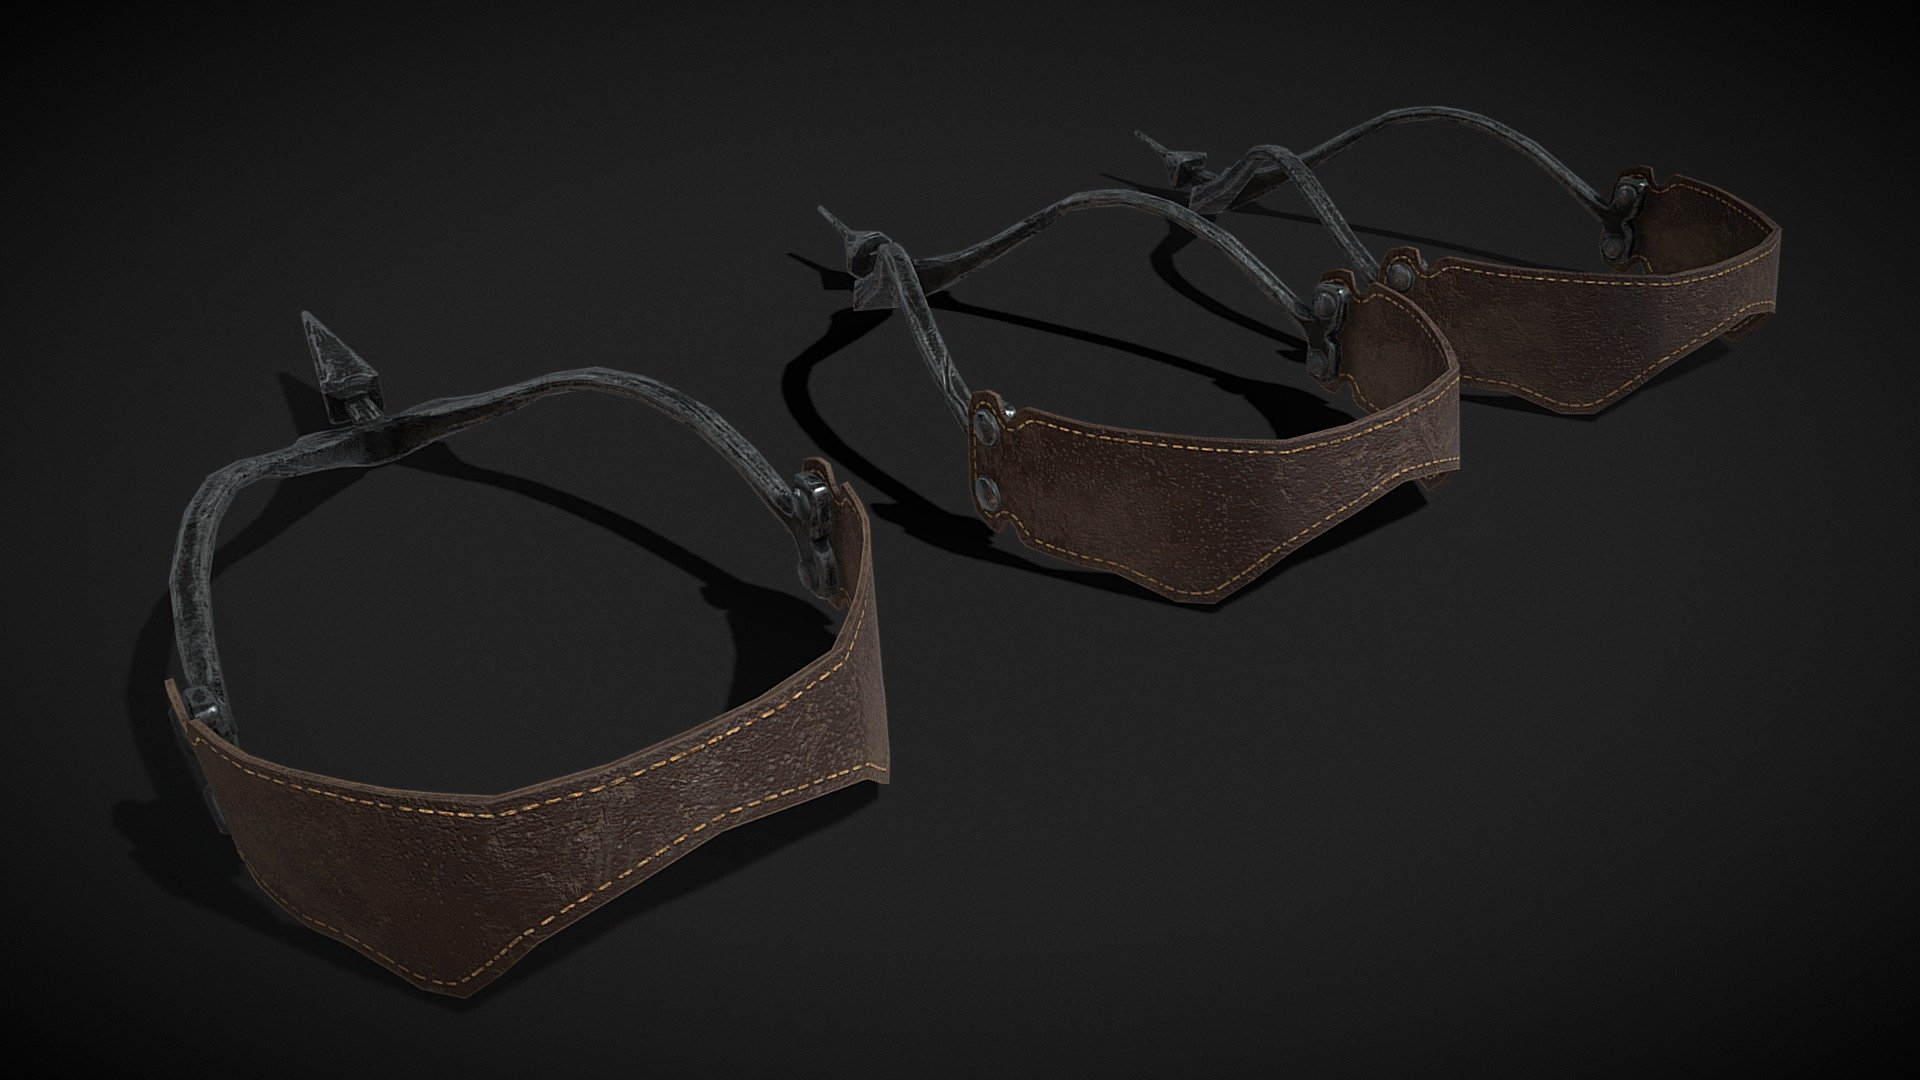 Three Prick Spurs - Buy Royalty Free 3D model by GetDeadEntertainment ...